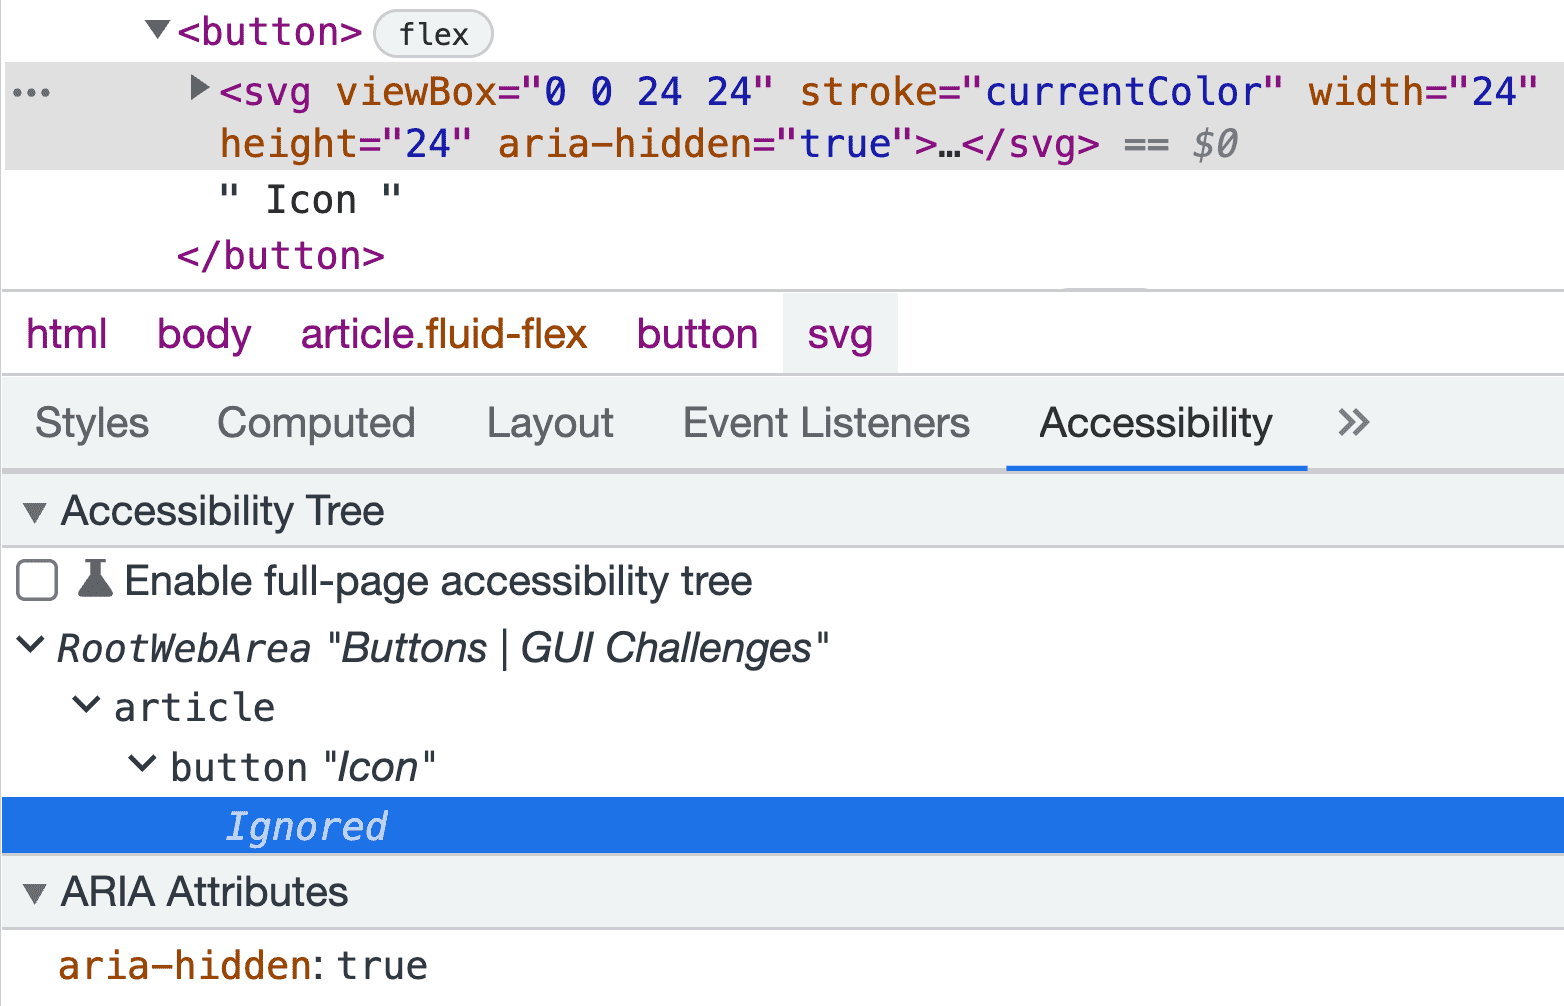 Chrome DevTools showing the accessibility tree for the button. The tree ignores the button image because it has aria-hidden set to true.